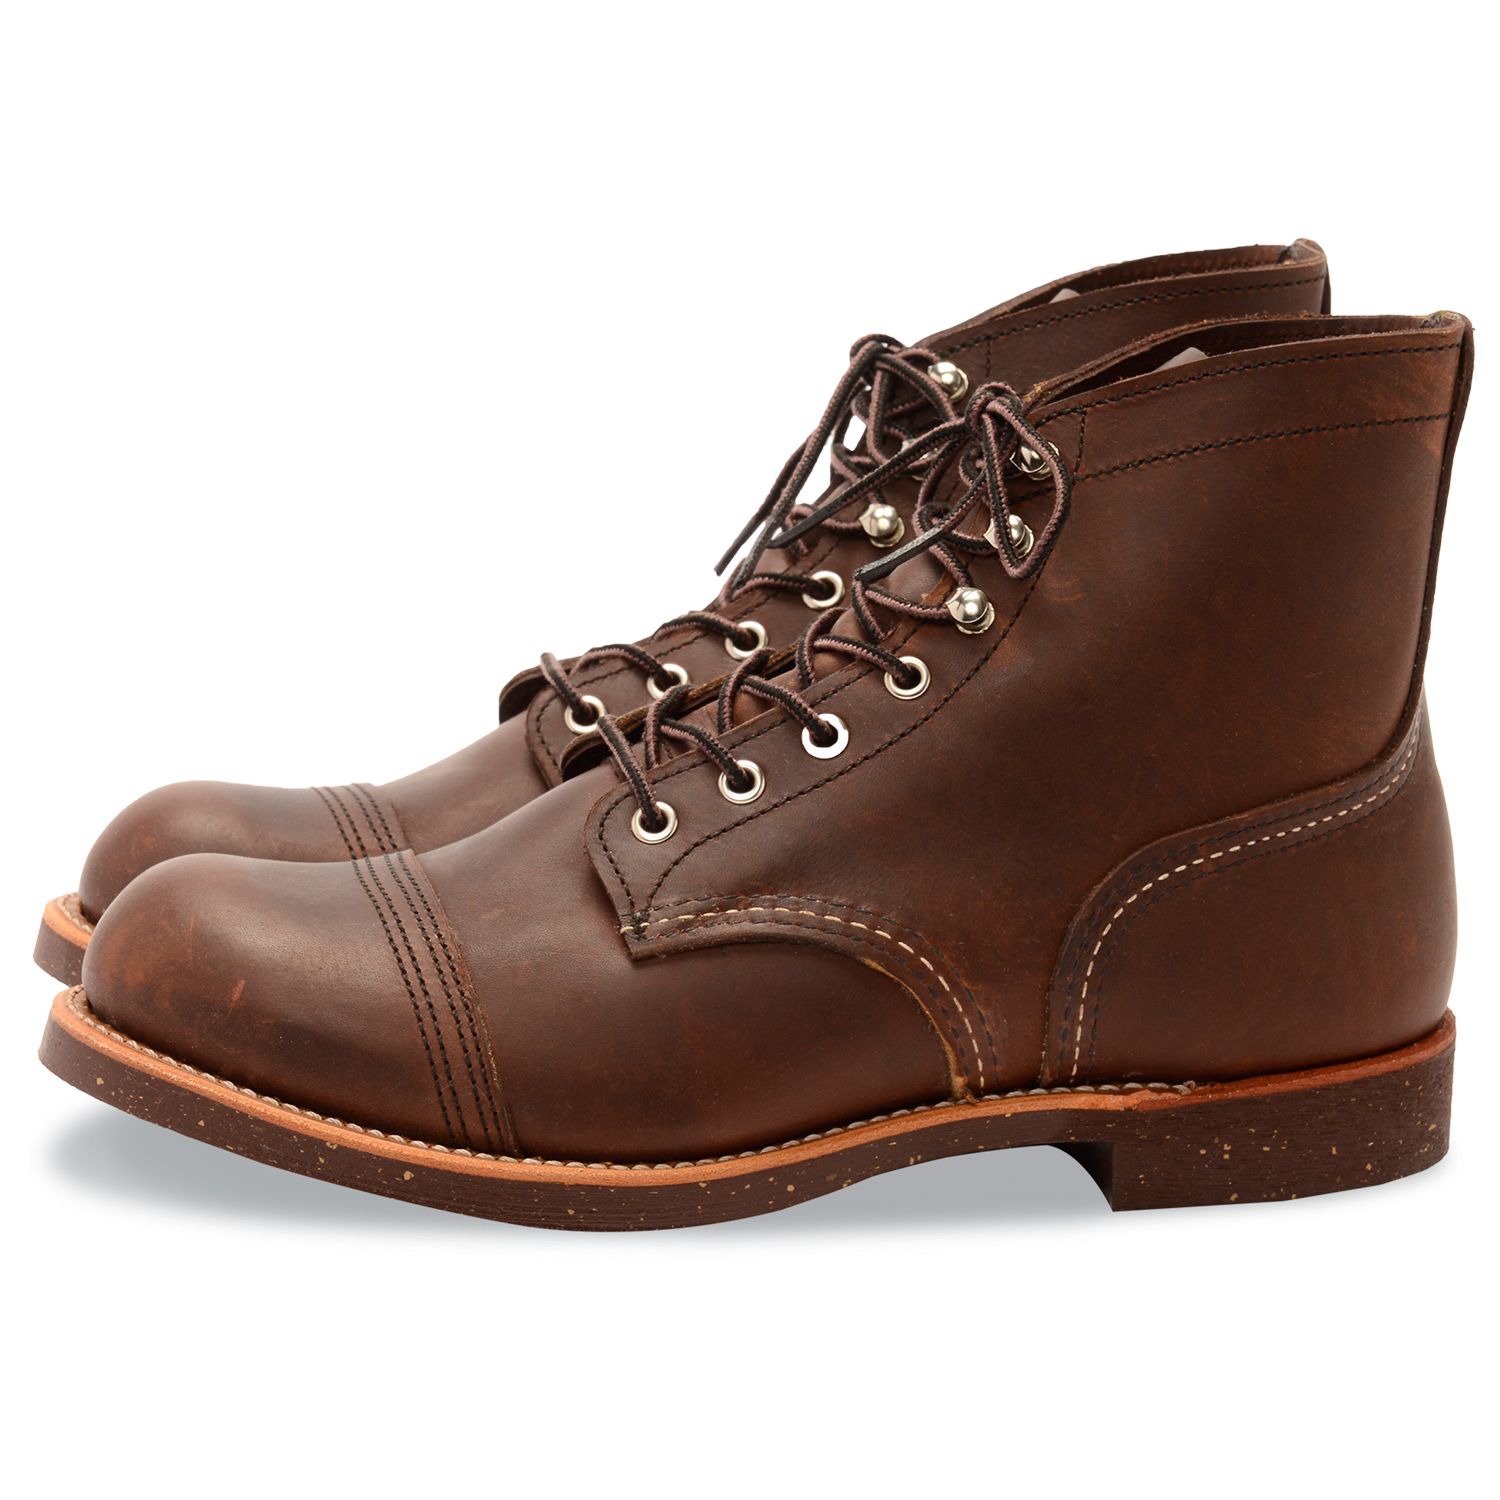 Buy Red Wing 8111 Iron Ranger Boots, Amber Harness Online at johnlewis.com